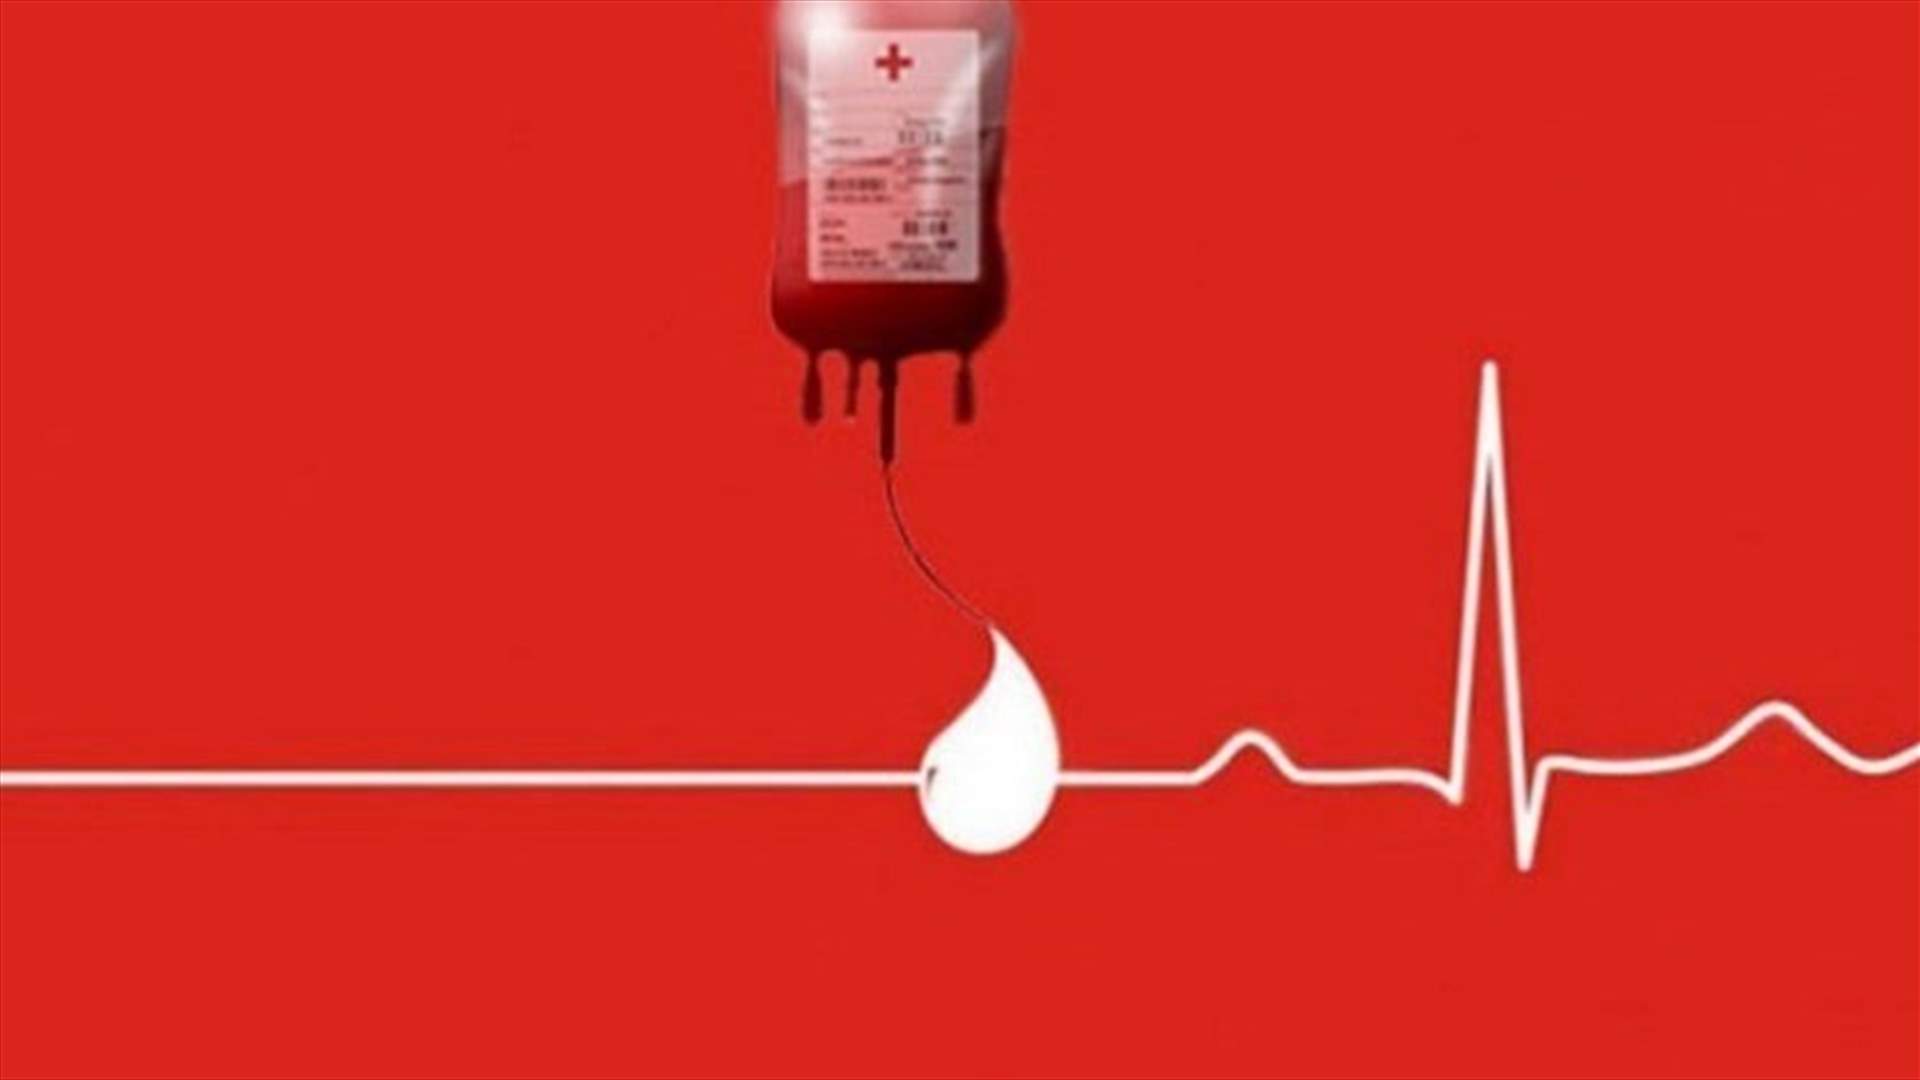 A patient at Mount Lebanon Hospital urgently needs B+ blood type